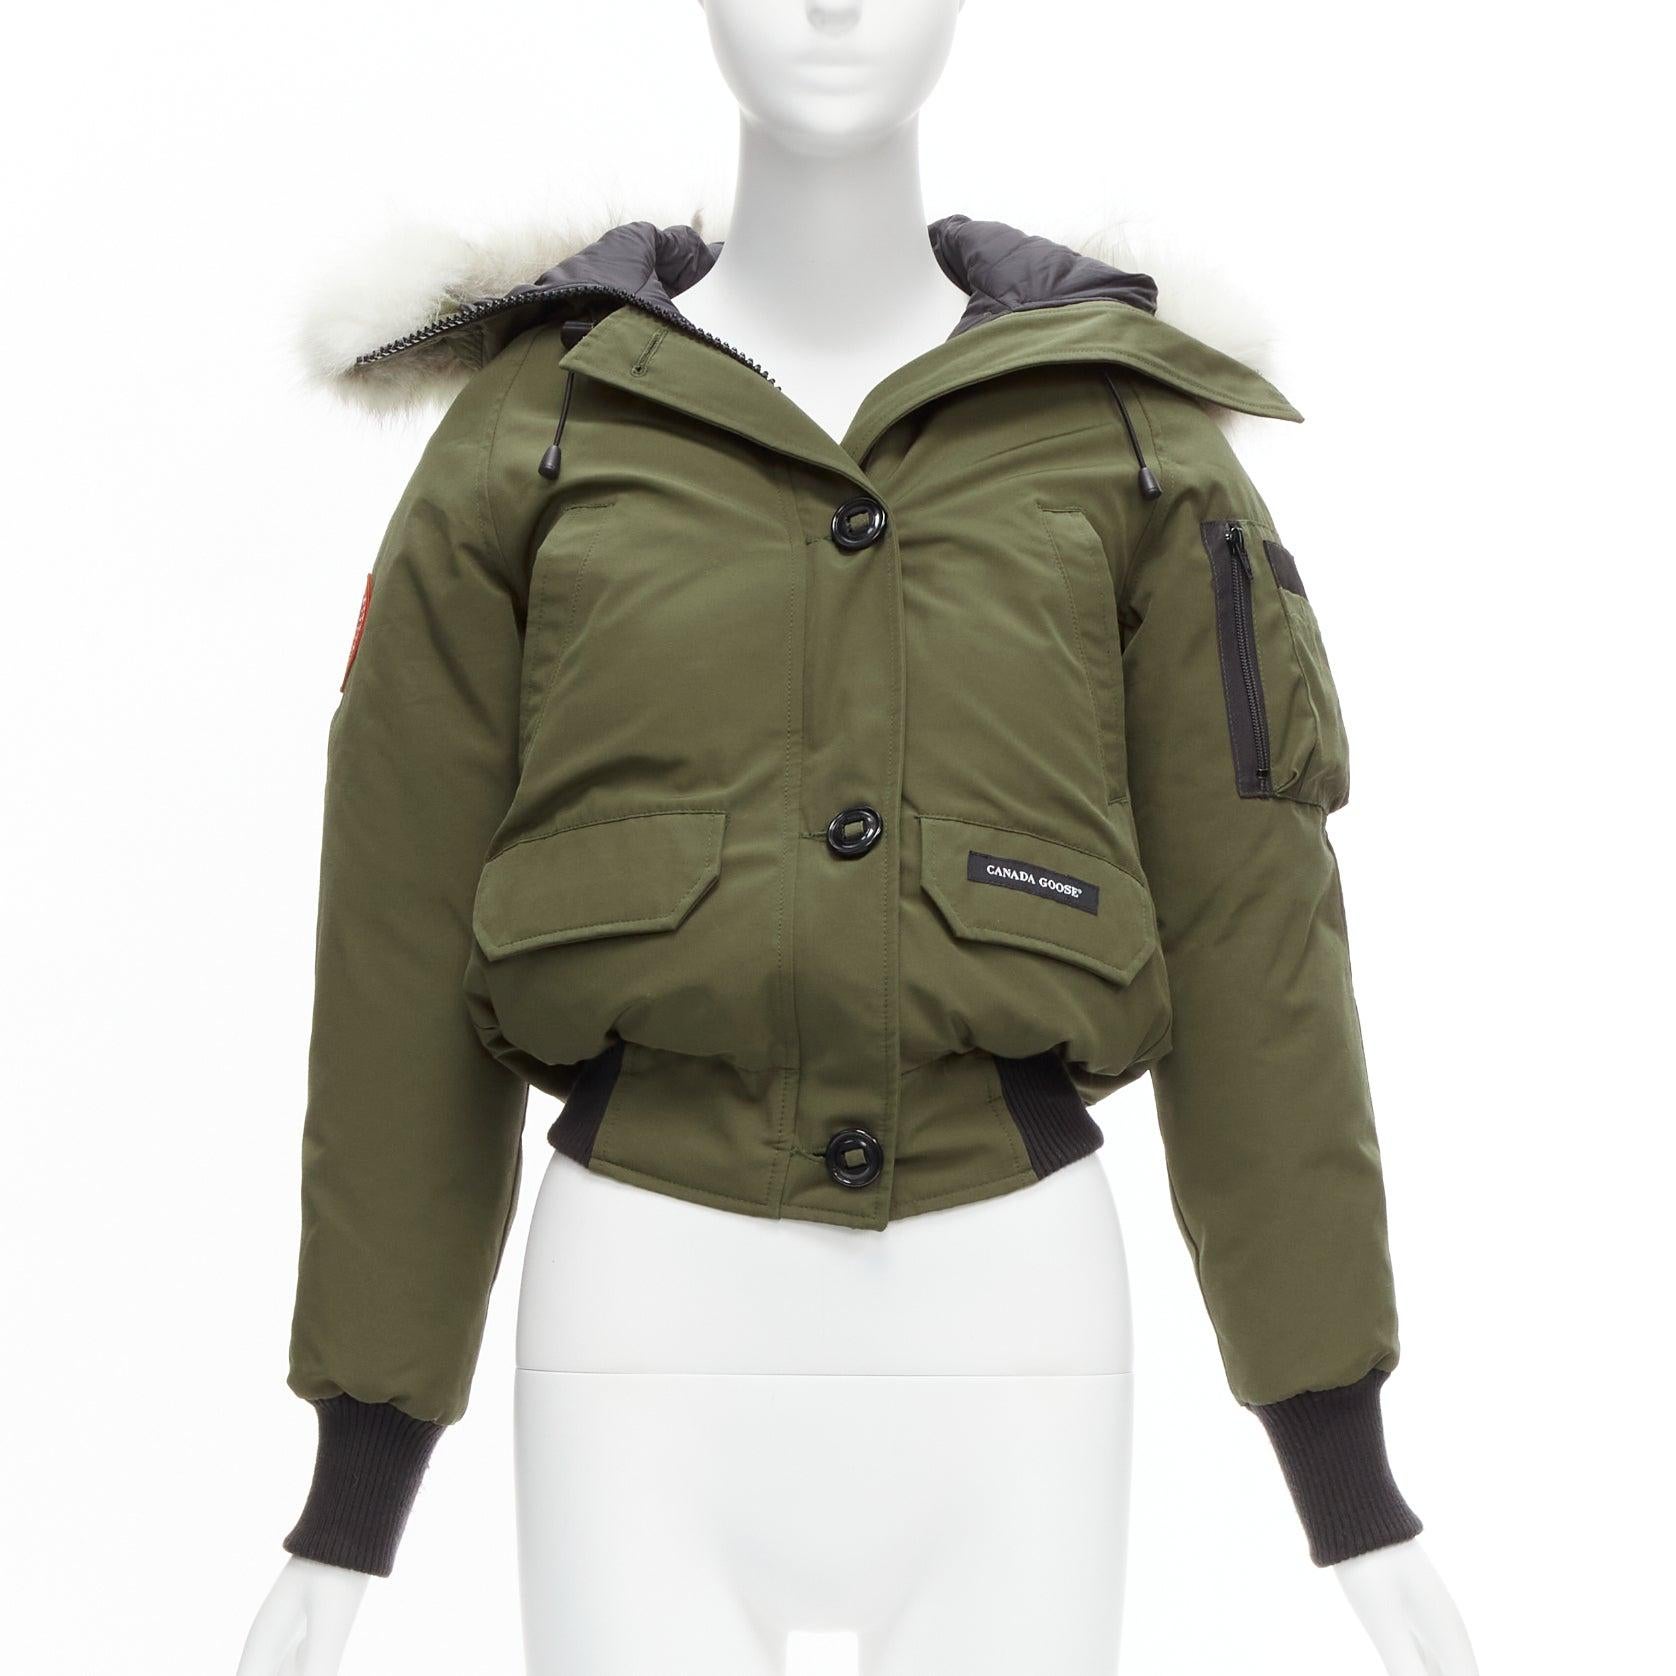 CANADA GOOSE army green nylon duck down fur trim hooded puffer jacket XXS
Reference: SNKO/A00262
Brand: Canada Goose
Material: Nylon
Color: Green, Black
Pattern: Solid
Closure: Zip
Lining: Black Down
Extra Details: Front center zip. Fur hood trim.